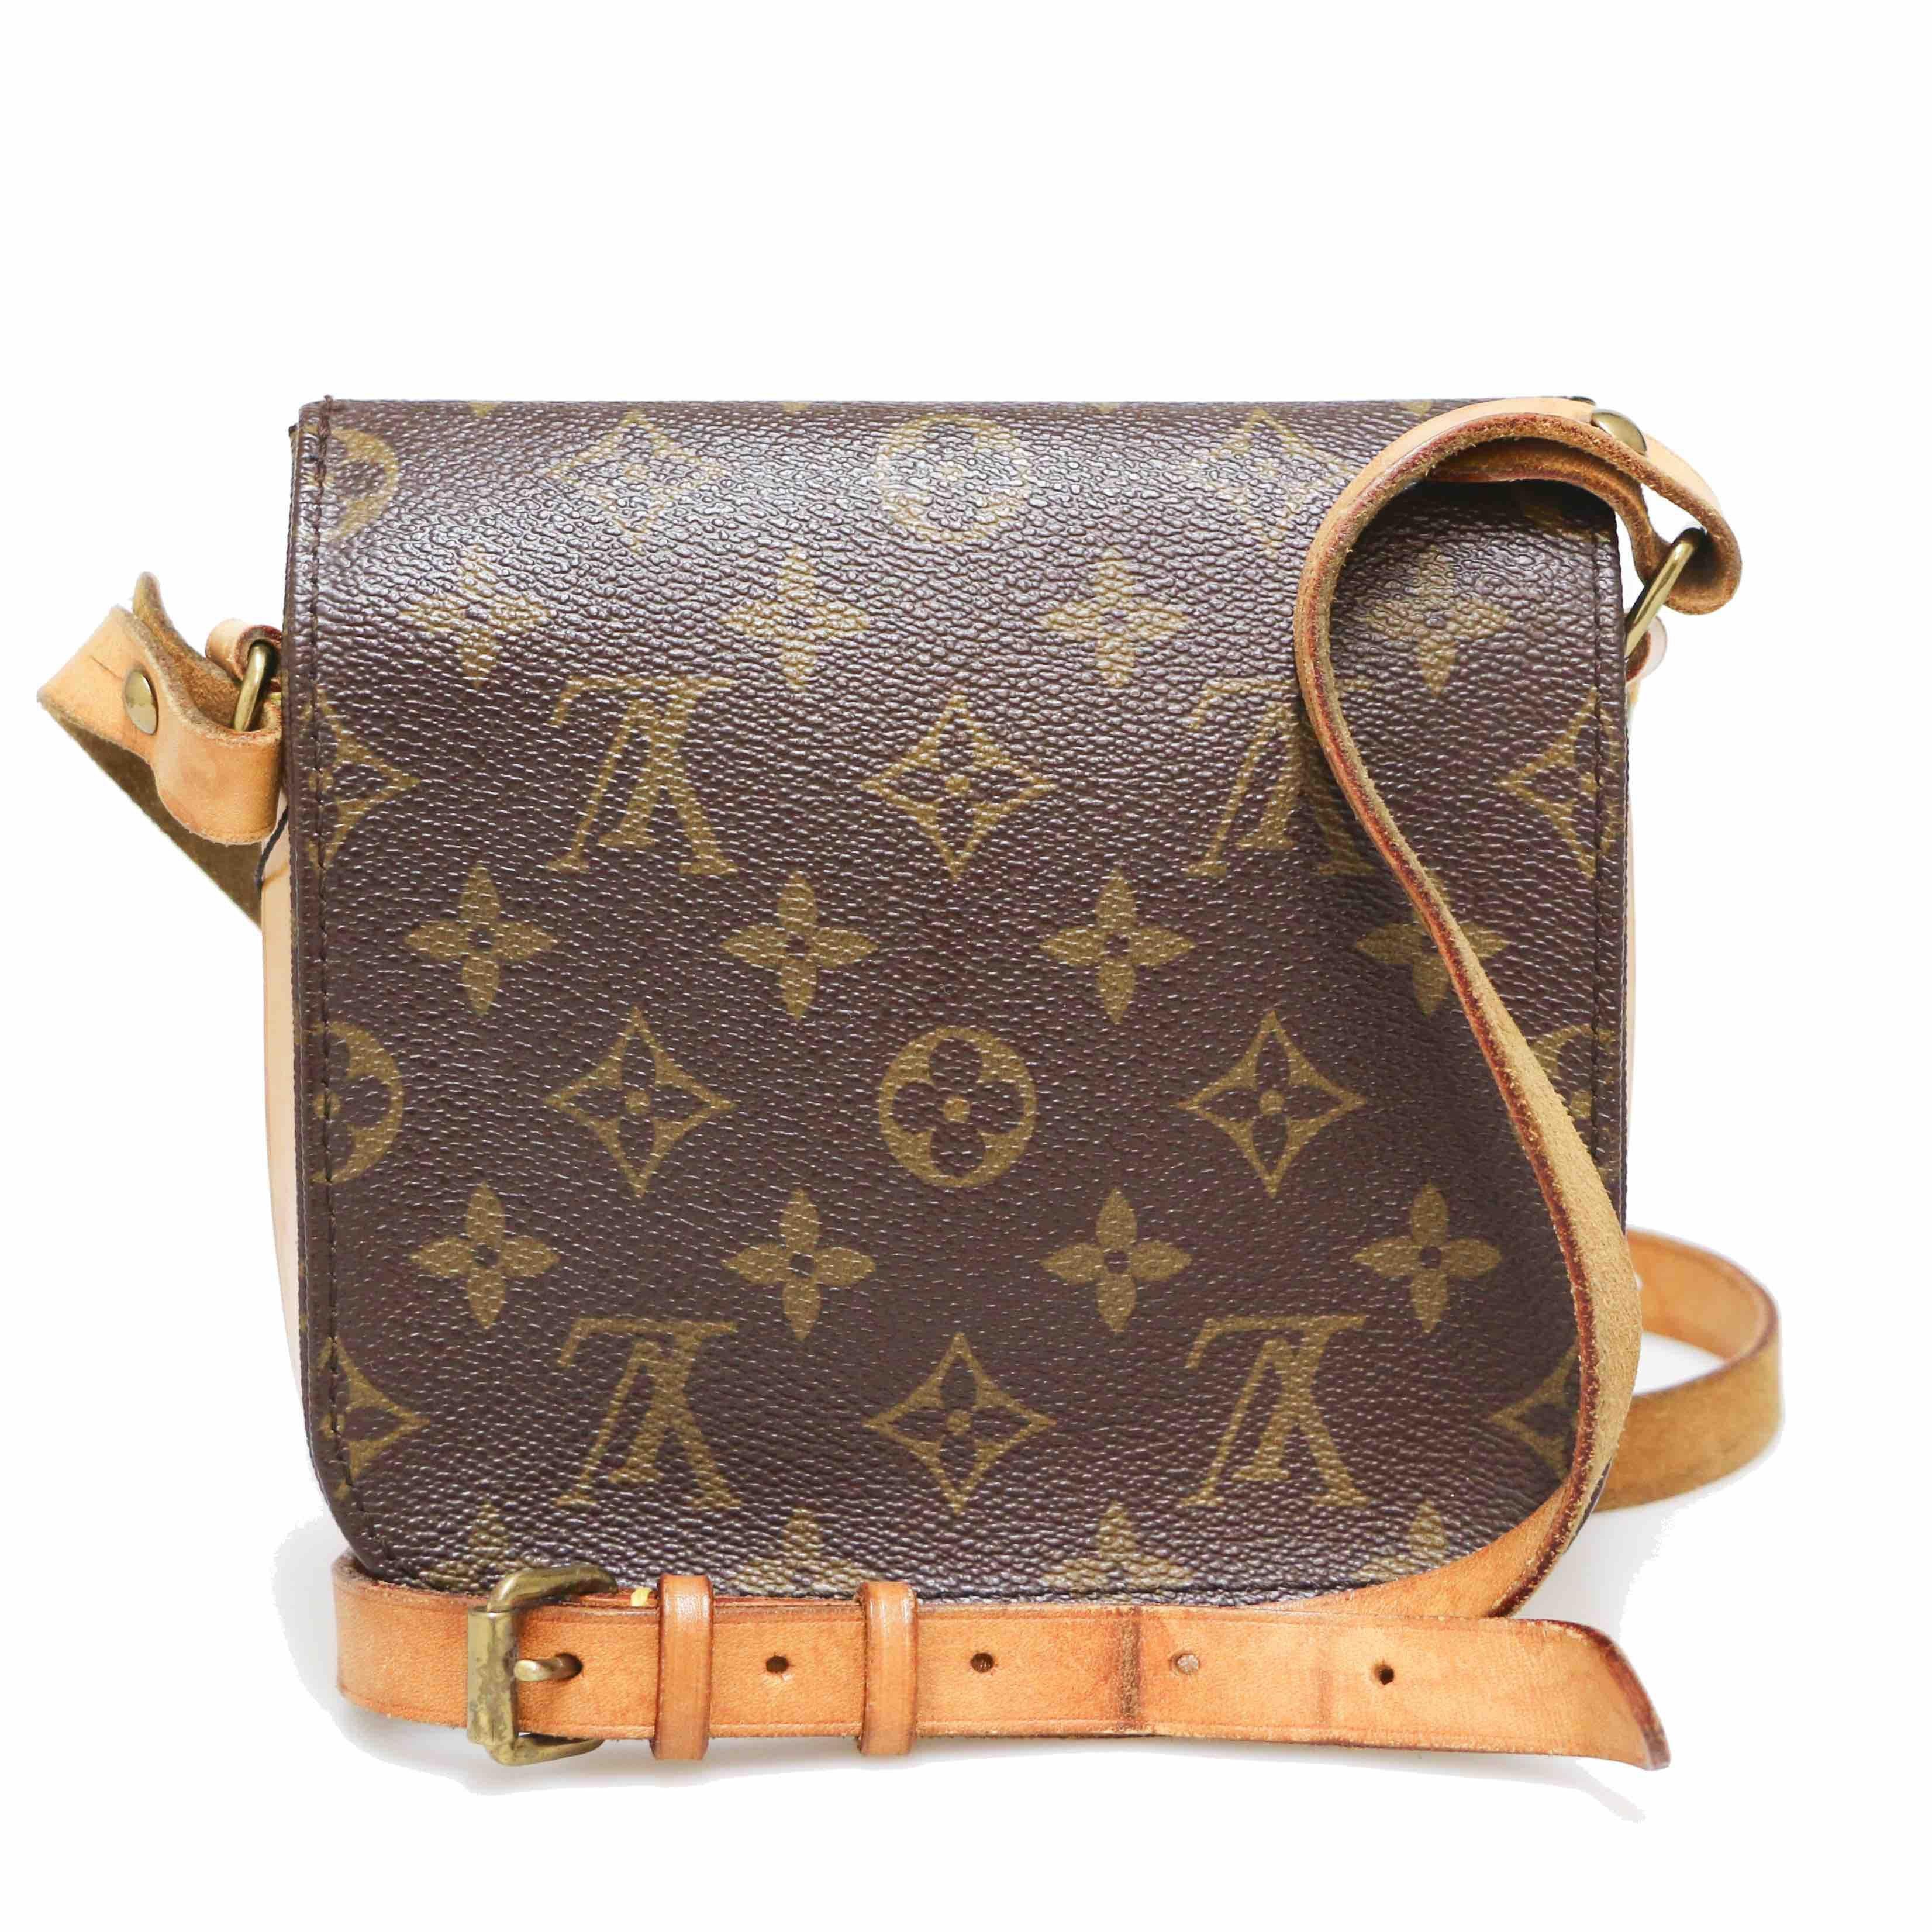 LOUIS VUITTON Vintage Mini Cartouchière in Toile and Leather. Unisex crossbody bag. Buckle closure. The hardware is in aged gold metal.
In good condition. Stain on the leather. No corner wear.
Made in France.
Dimensions: 17 x 17 x 5cm.
Shoulder